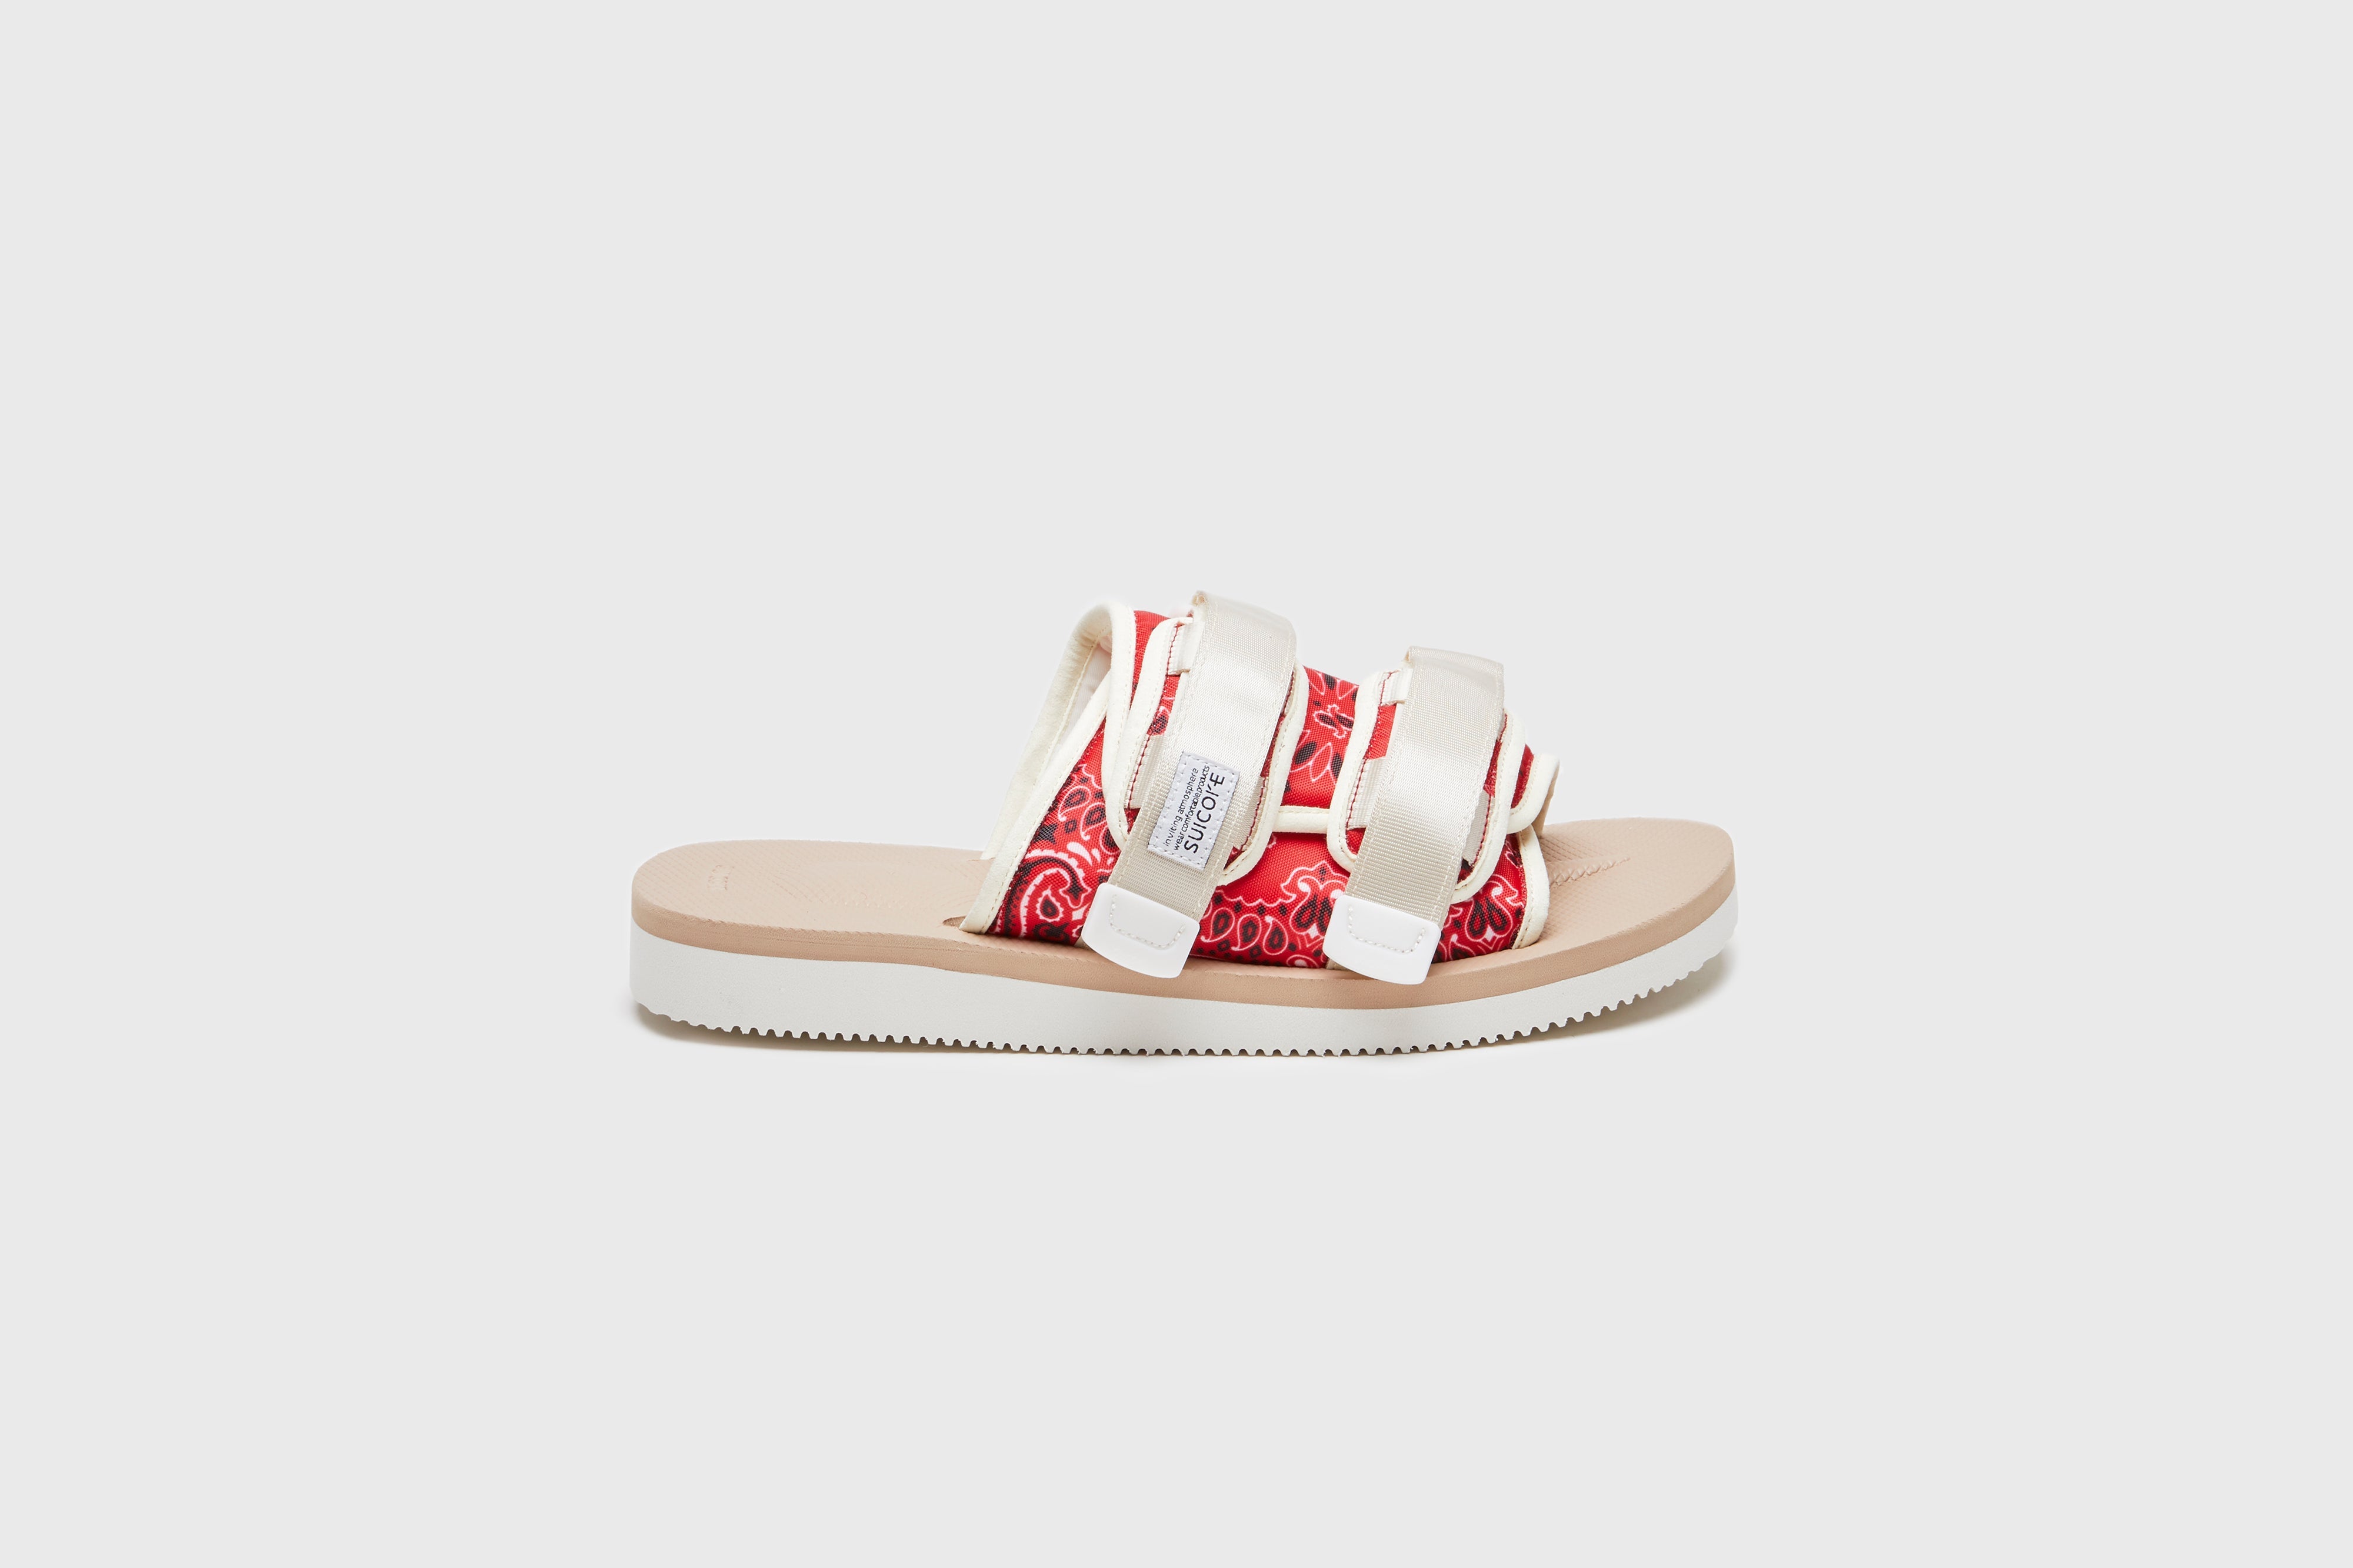 SUICOKE MOTO-Cab-PT05 slides in Red & Beige | eightywingold